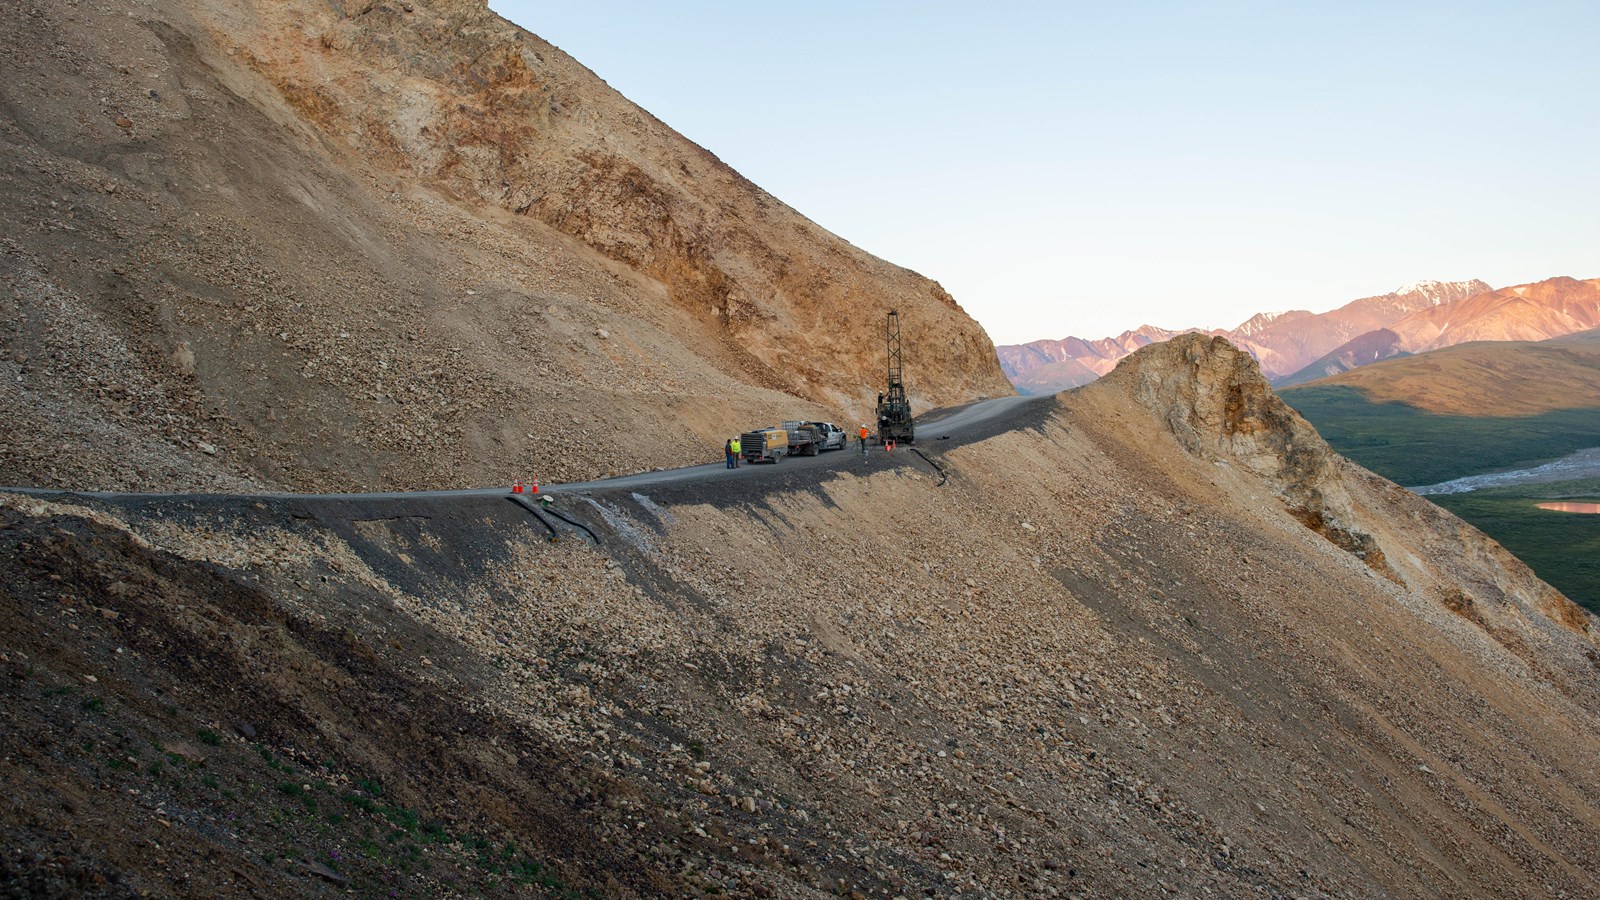 A truck and drilling equipment on a narrow road with a steep, rocky slope below.